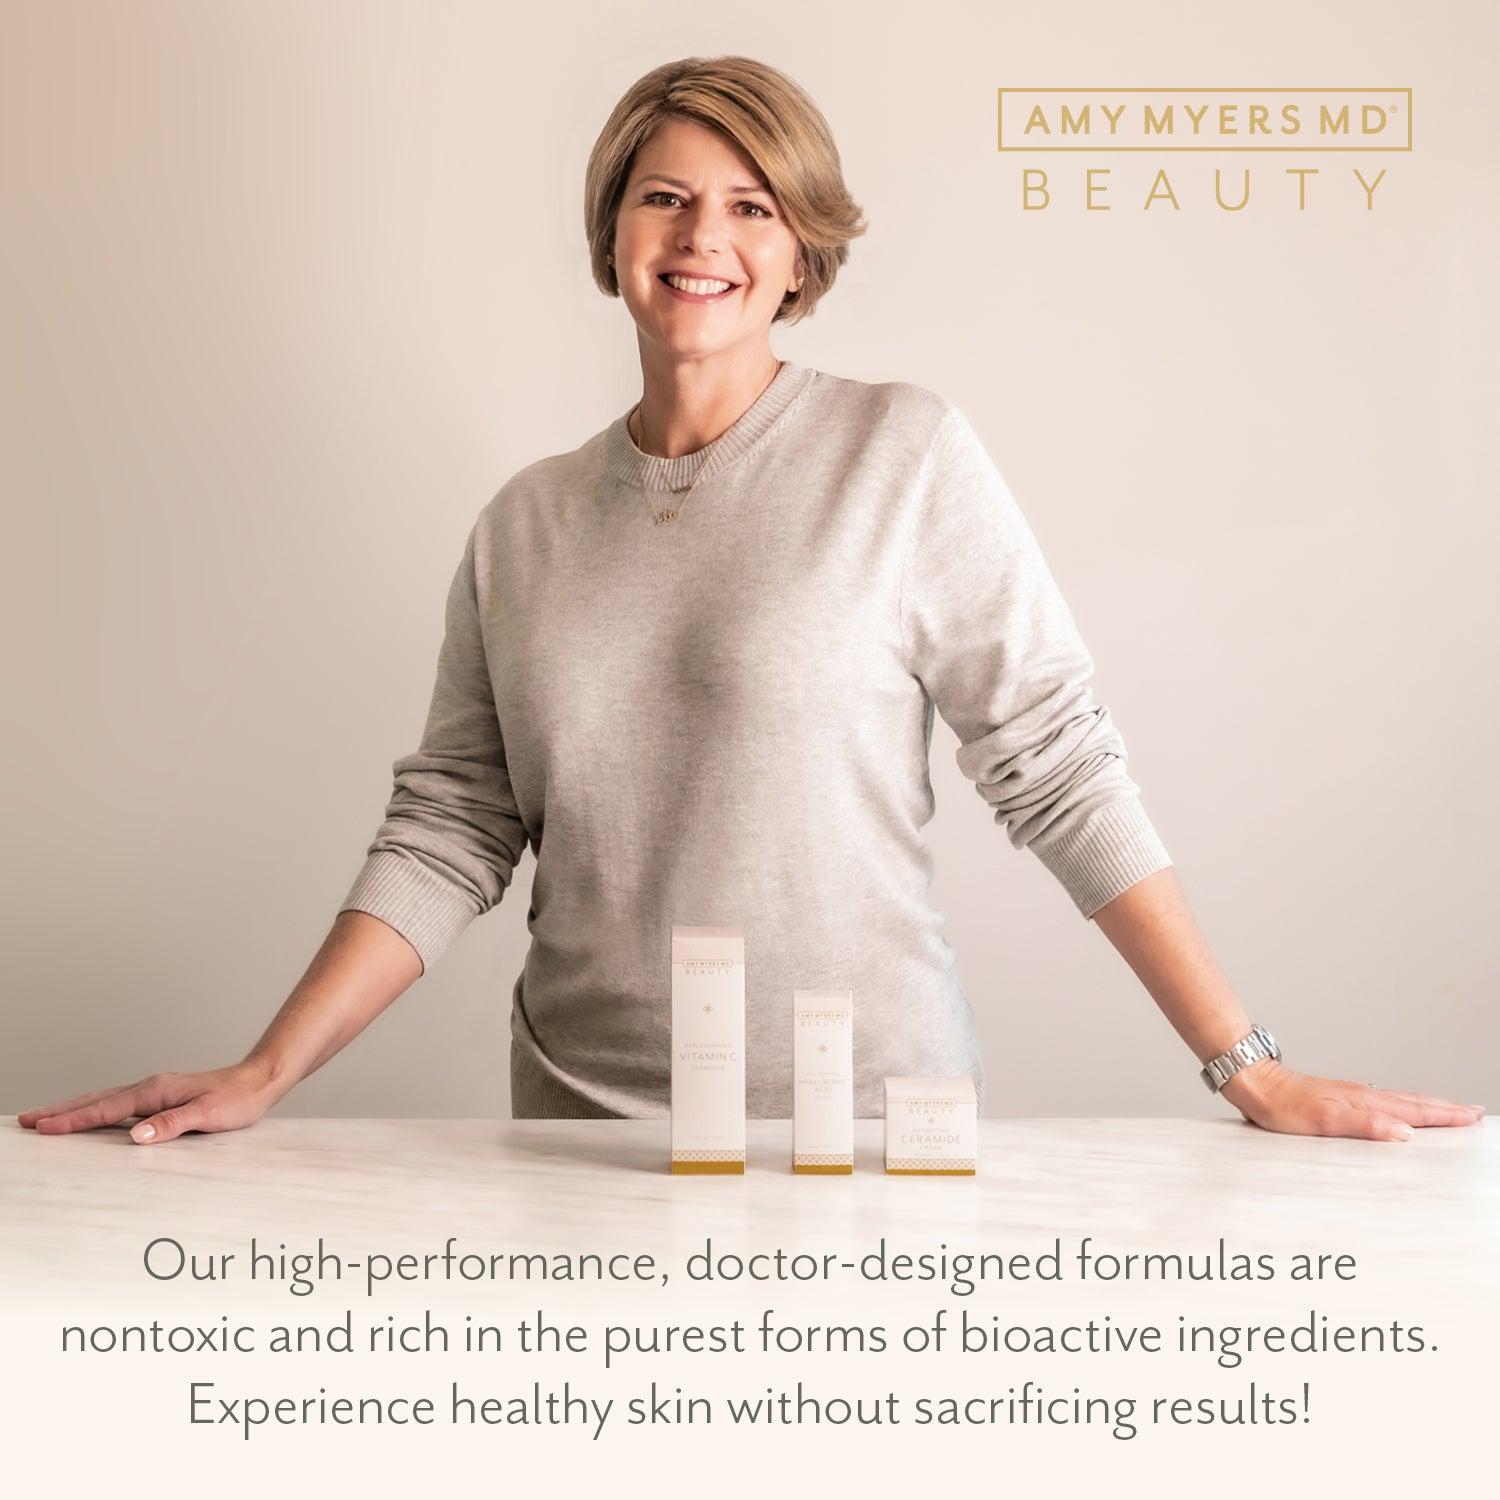 Dr. Amy Myers smiling as she stands behind her beauty and skincare products - Amy Myers MD®